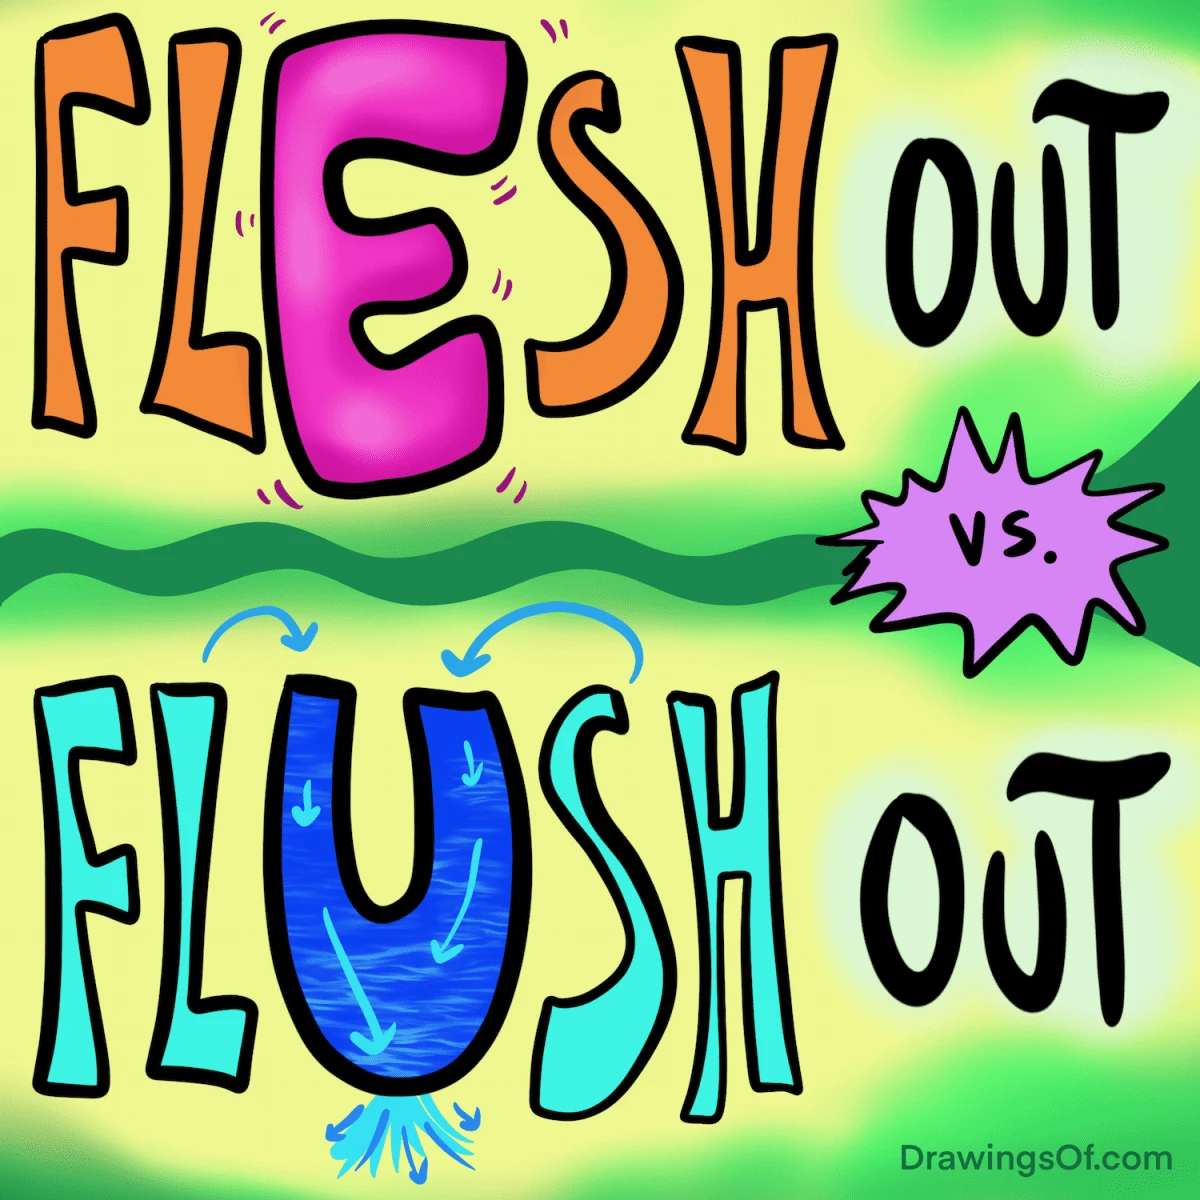 "Flesh out" or "Flush out?"